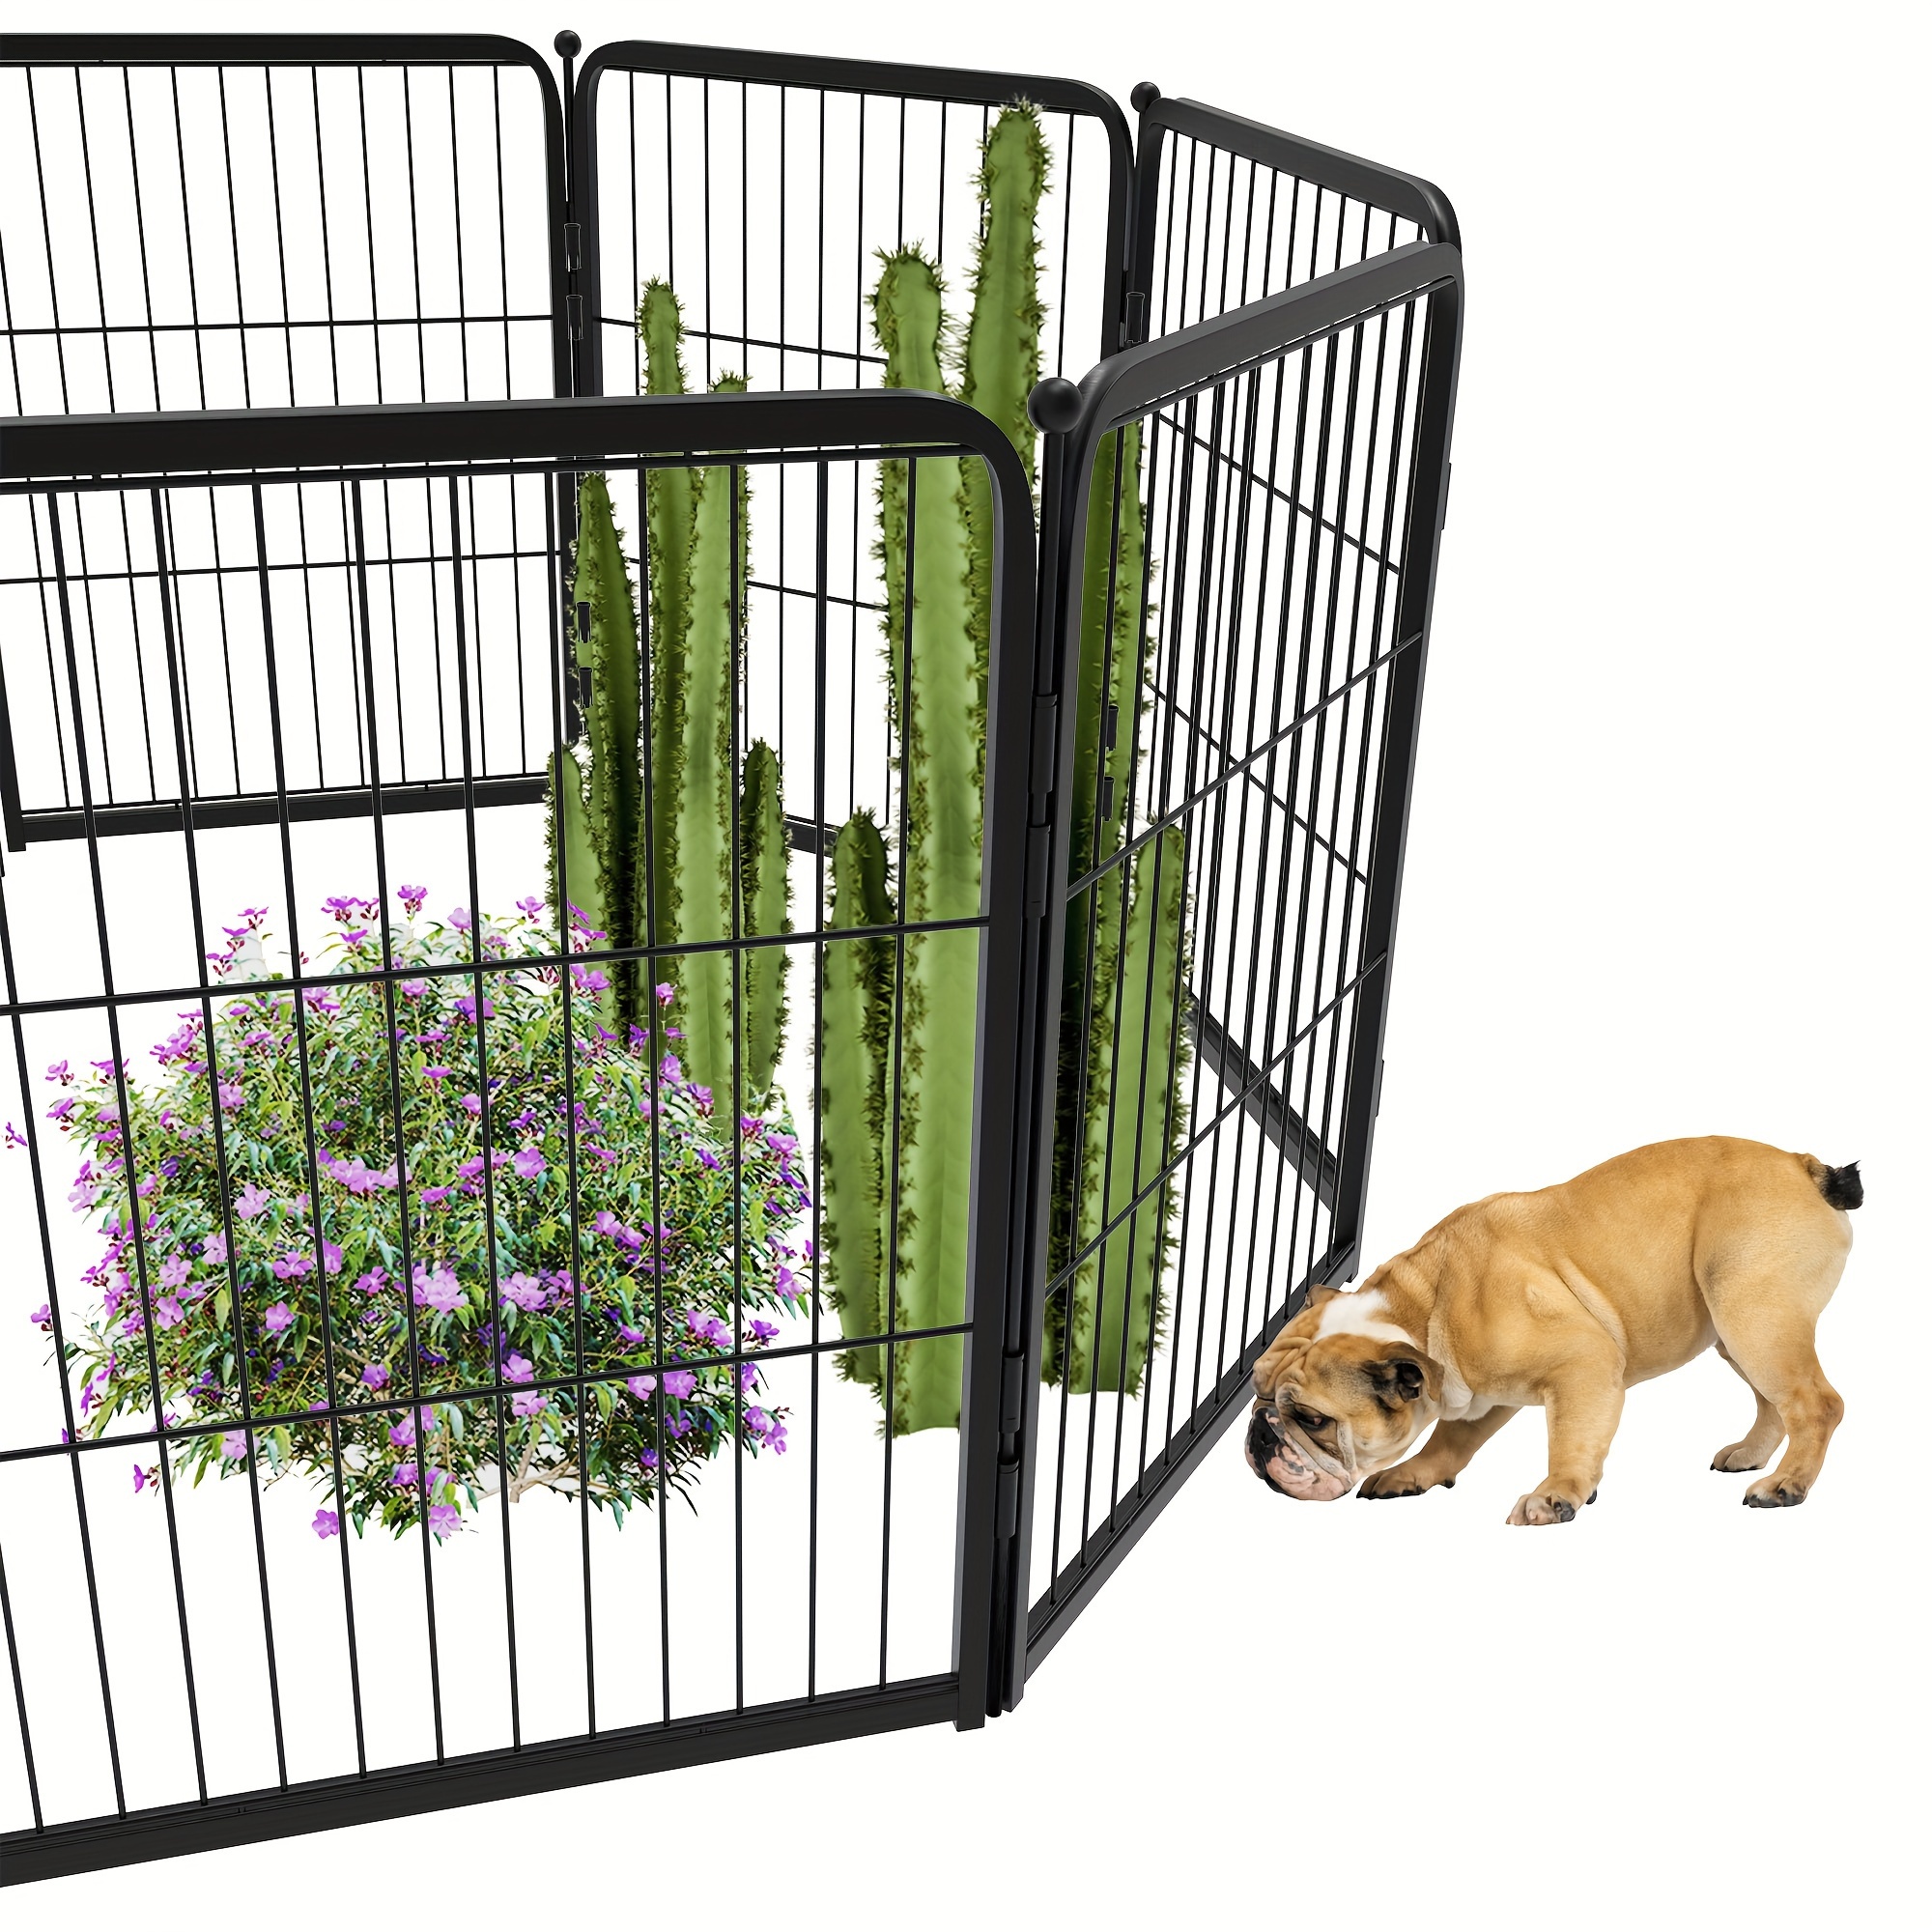 

Fxw 24/32/40"h Outdoor Decorative Garden Fence Panel With Gate, Pet Dog Barrier For Yard, Heavy-duty Metal, Black